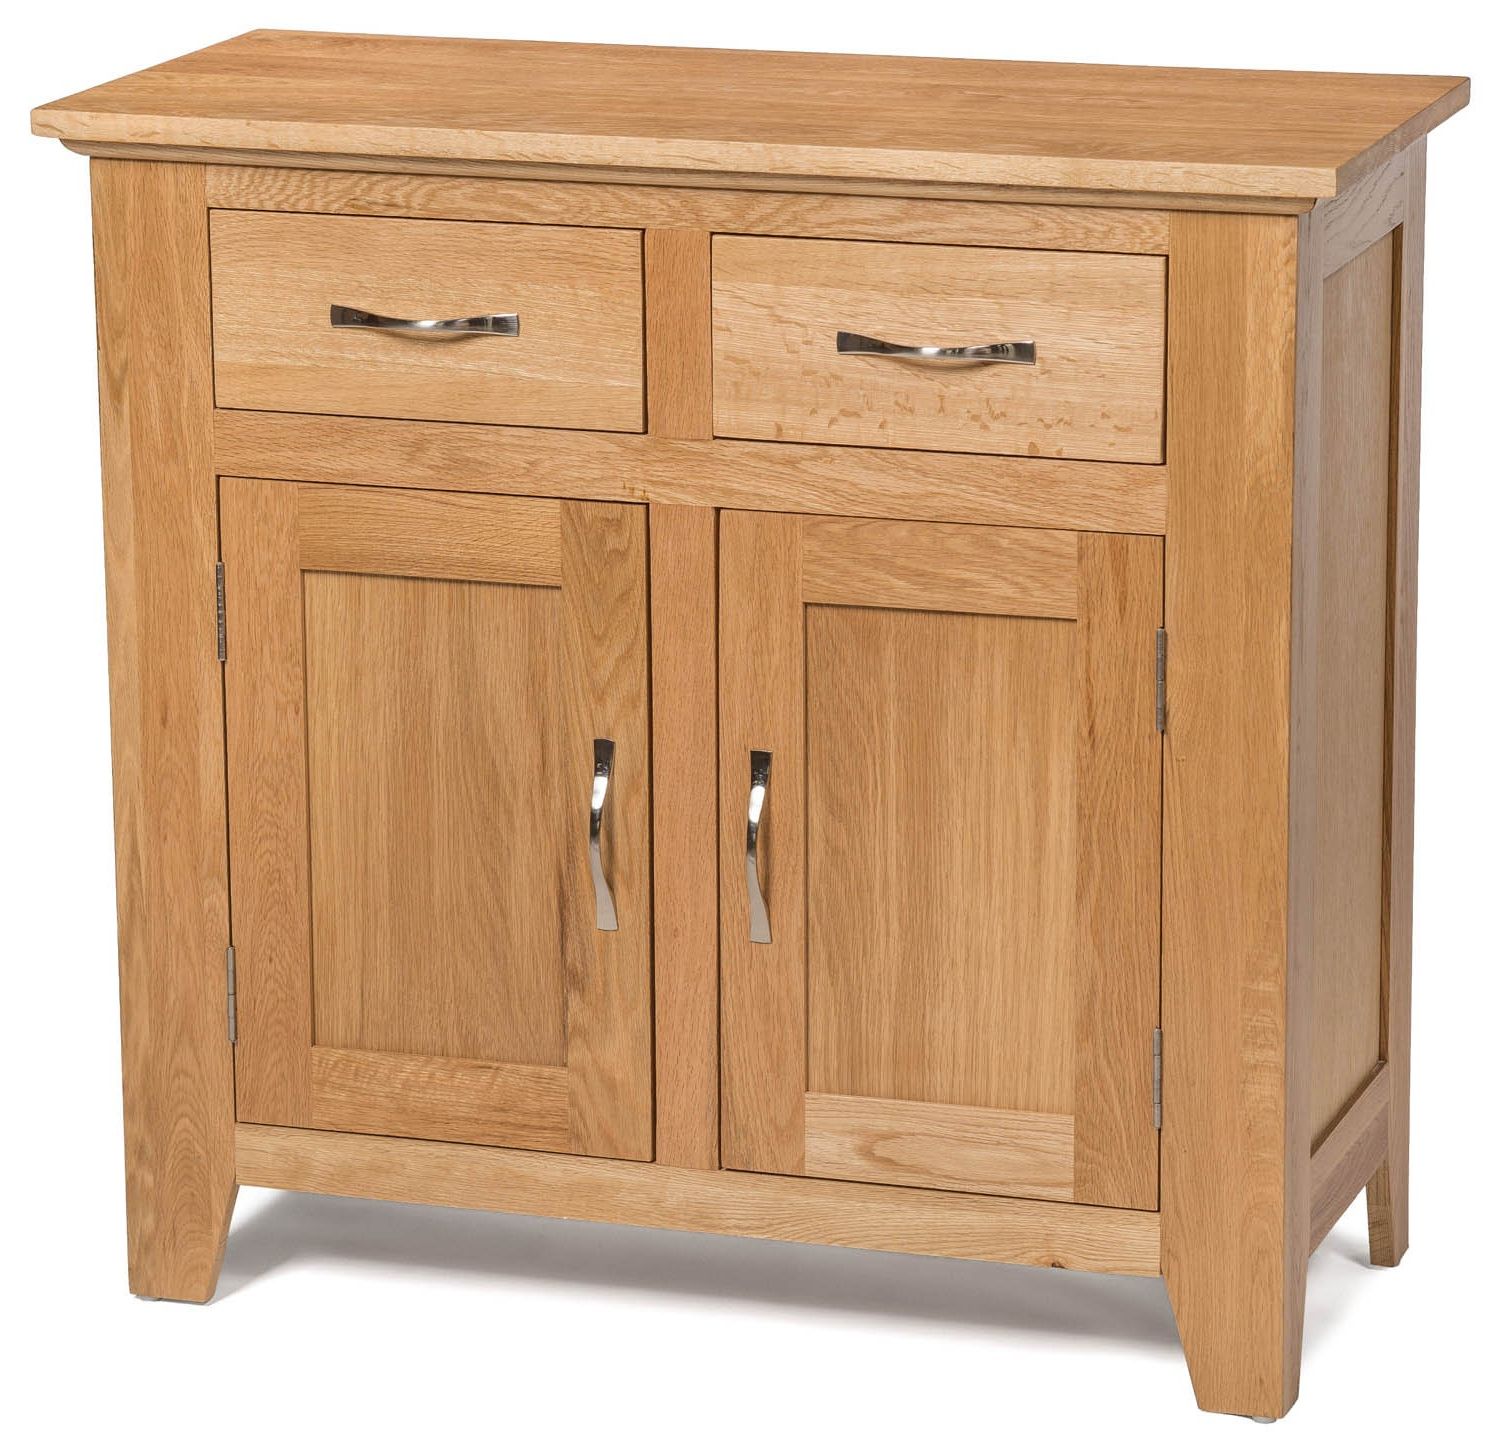 Camberley Oak Small 2 Door 2 Drawer Sideboard | Hallowood Within Norton Sideboards (View 16 of 20)